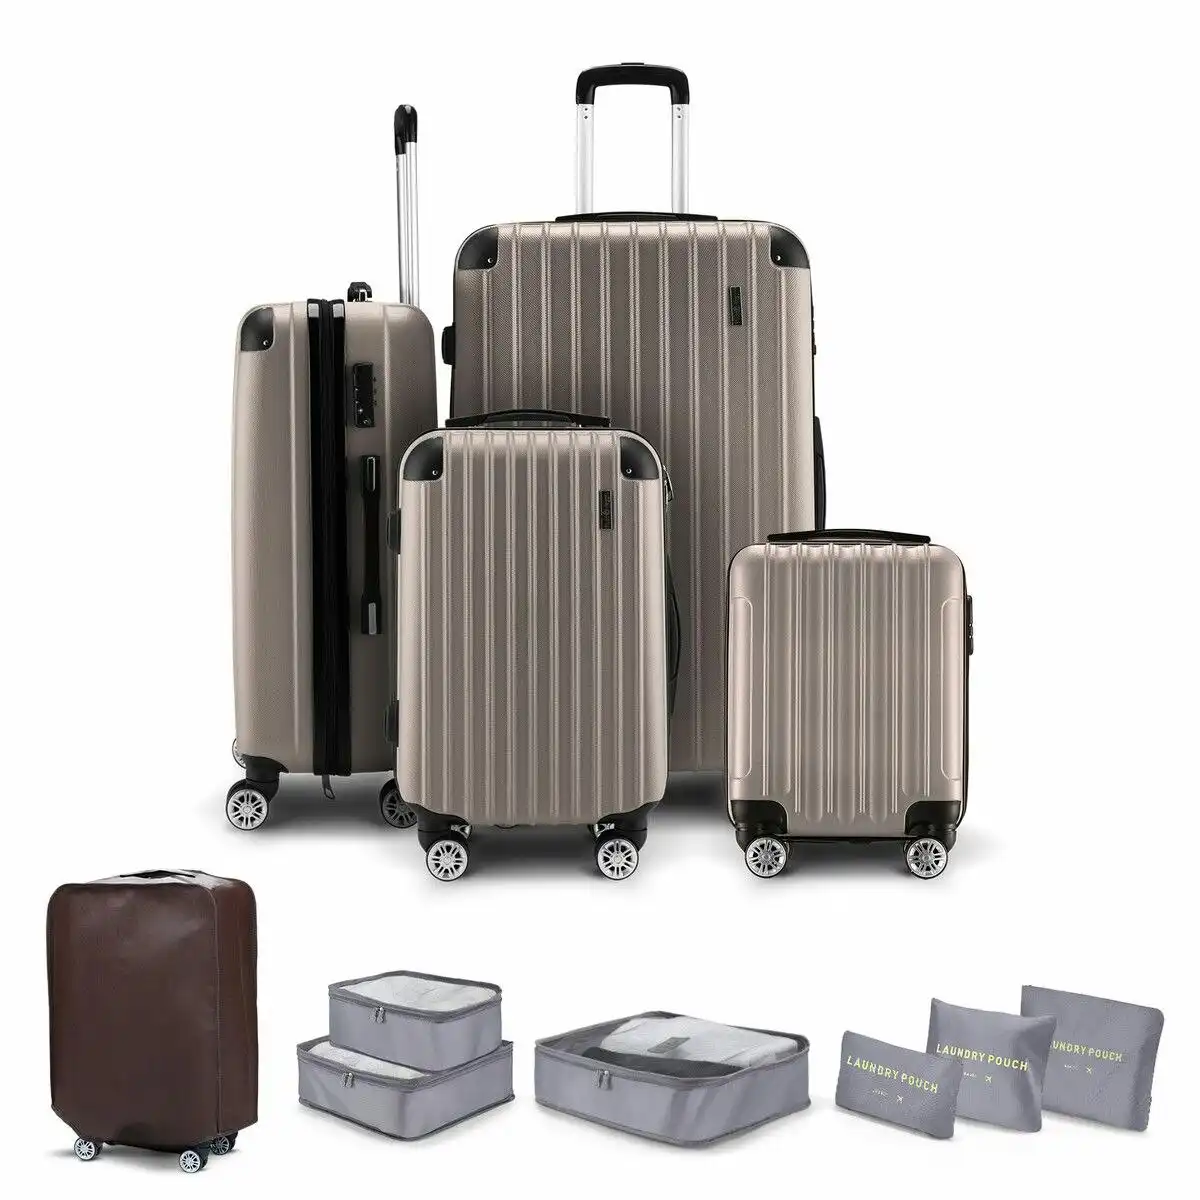 Buon Viaggio 4 Piece Luggage Set Suitcase Carry On Traveller Bags Hard Shell Trolley Checked Bag TSA Lock Lightweight Champagne